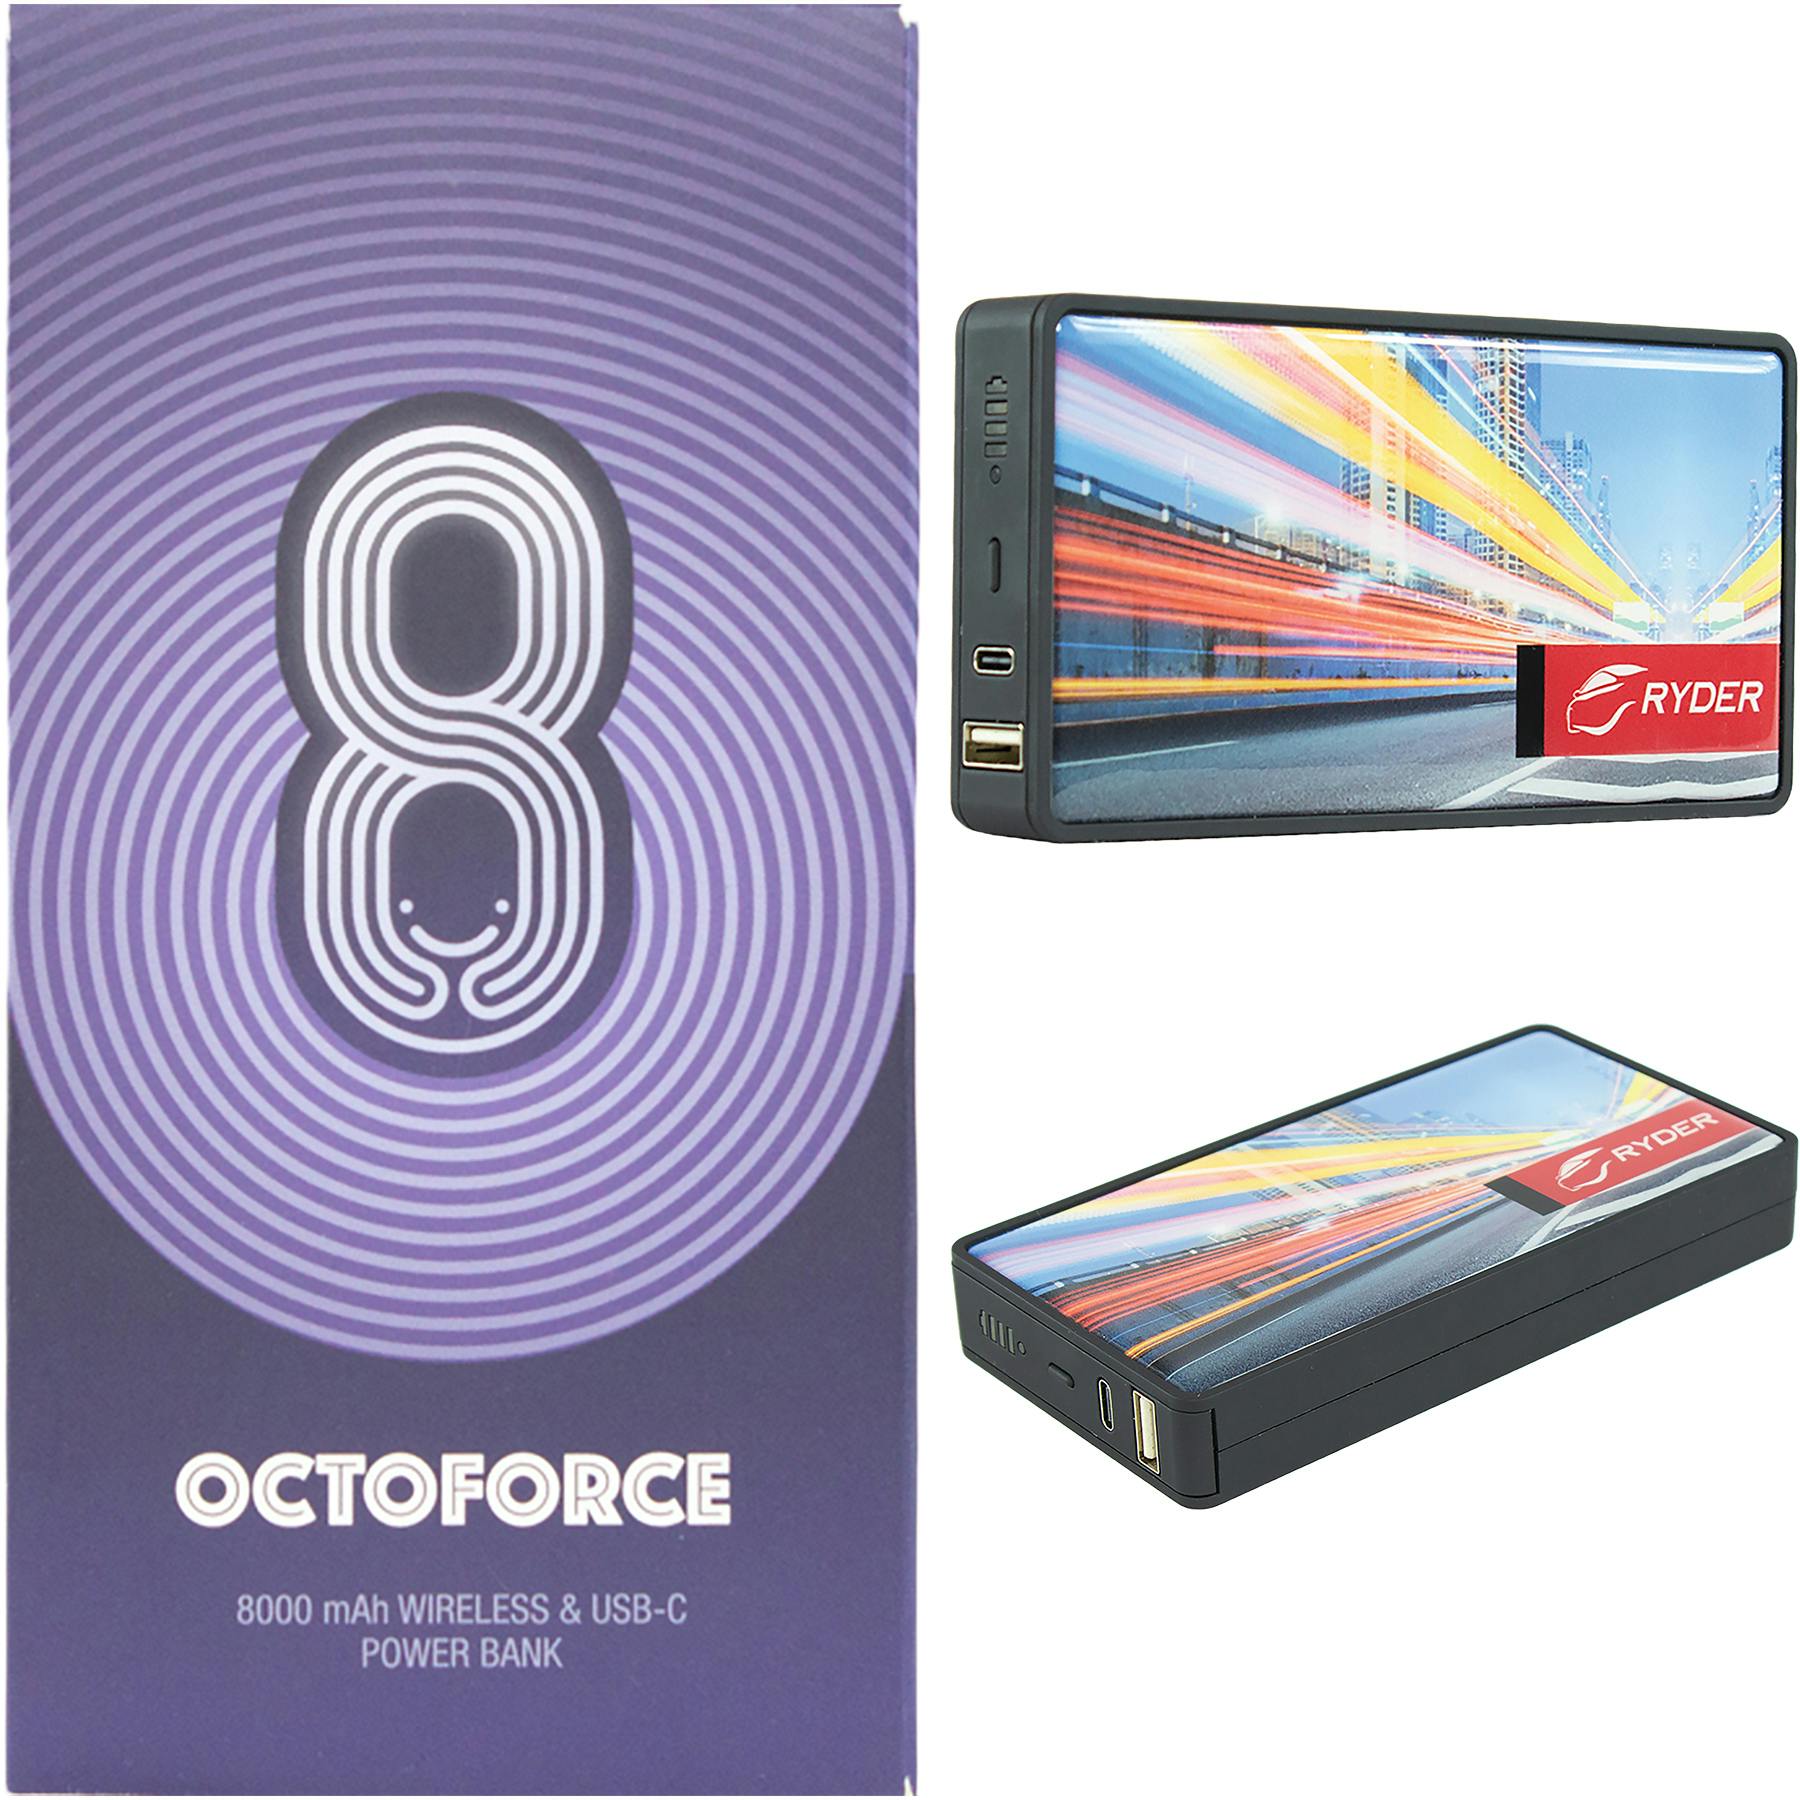 Image for Octoforce 2.0™ 8000mAh Wireless Power Bank